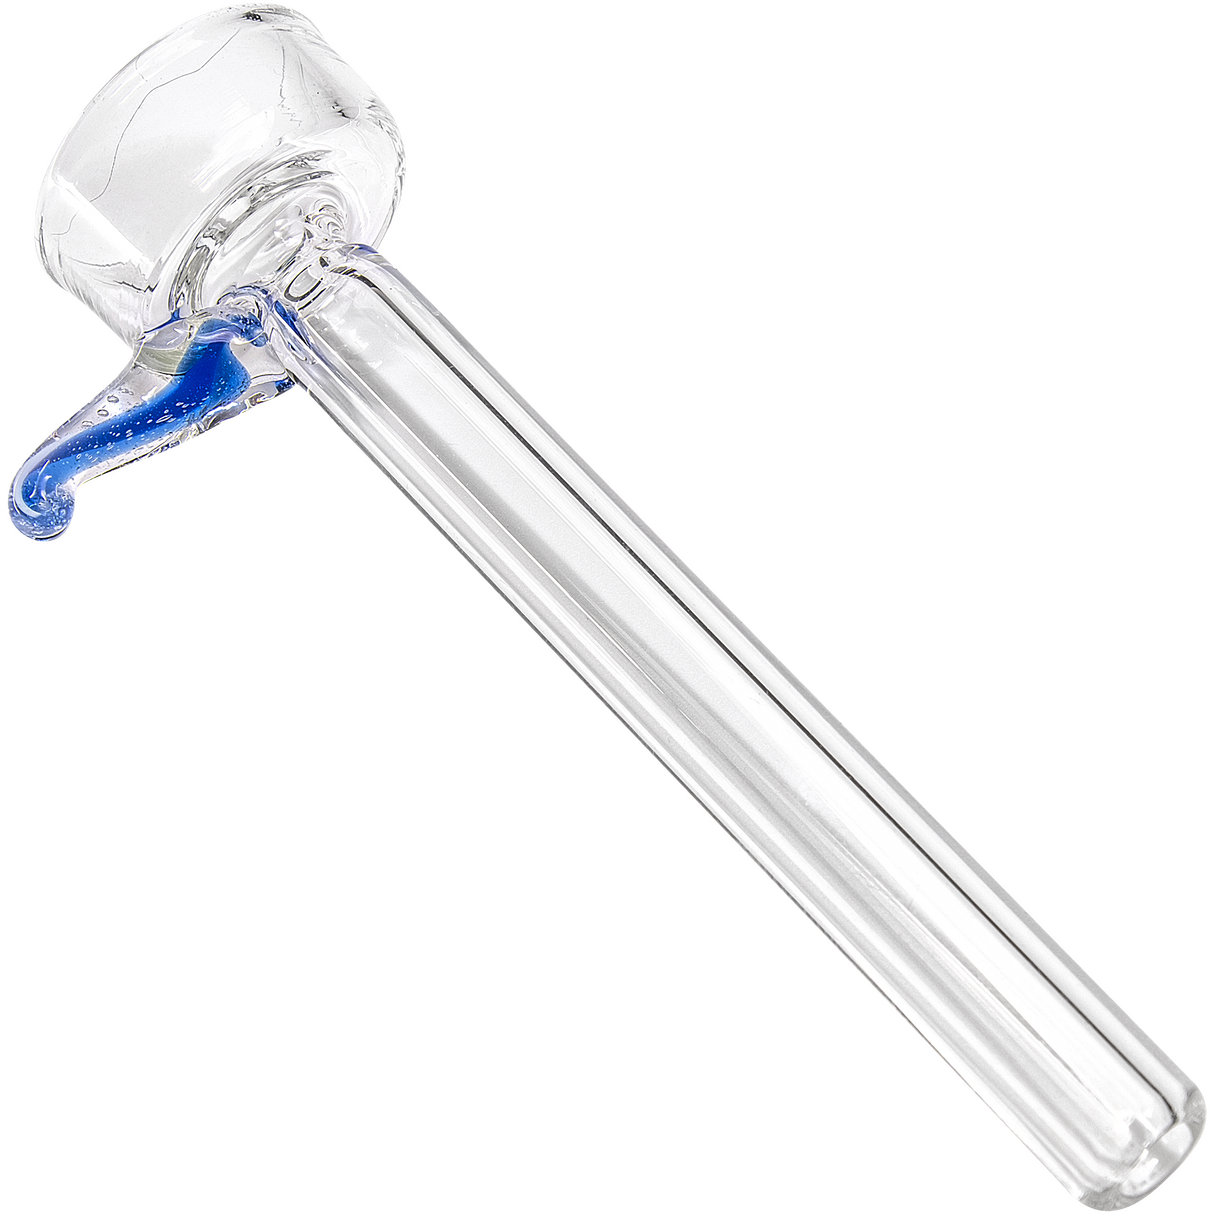 LA Pipes 9mm Clear Funnel Slide Bowl with Blue Handle for Bongs, Angled View